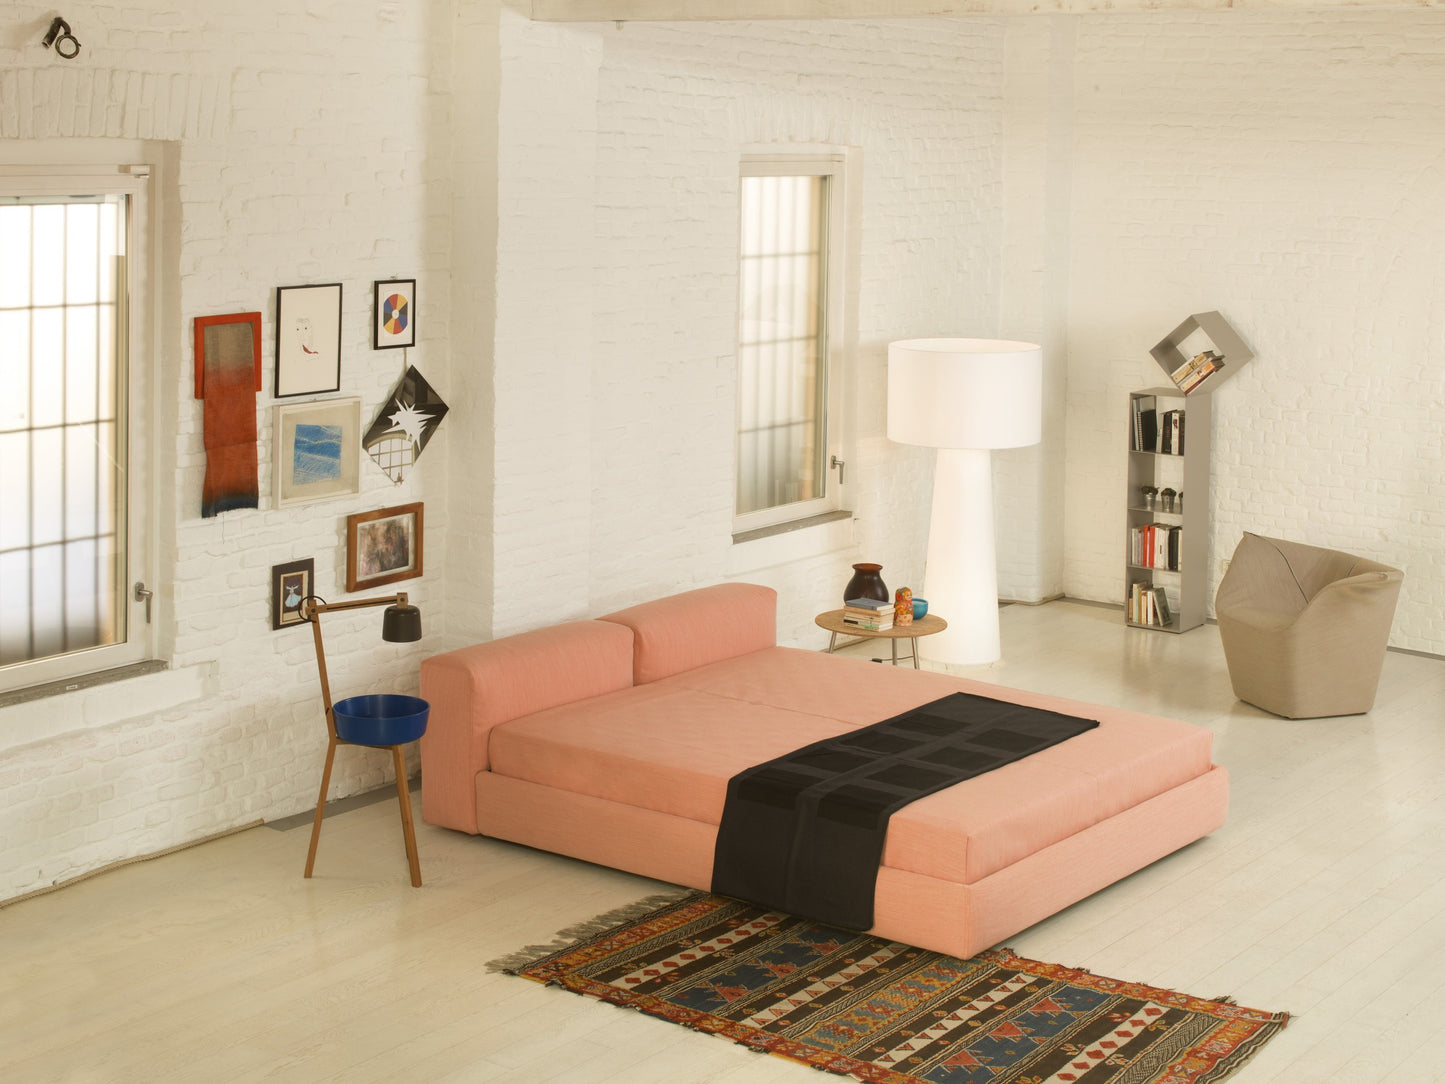 Cappellini Superoblong Bed